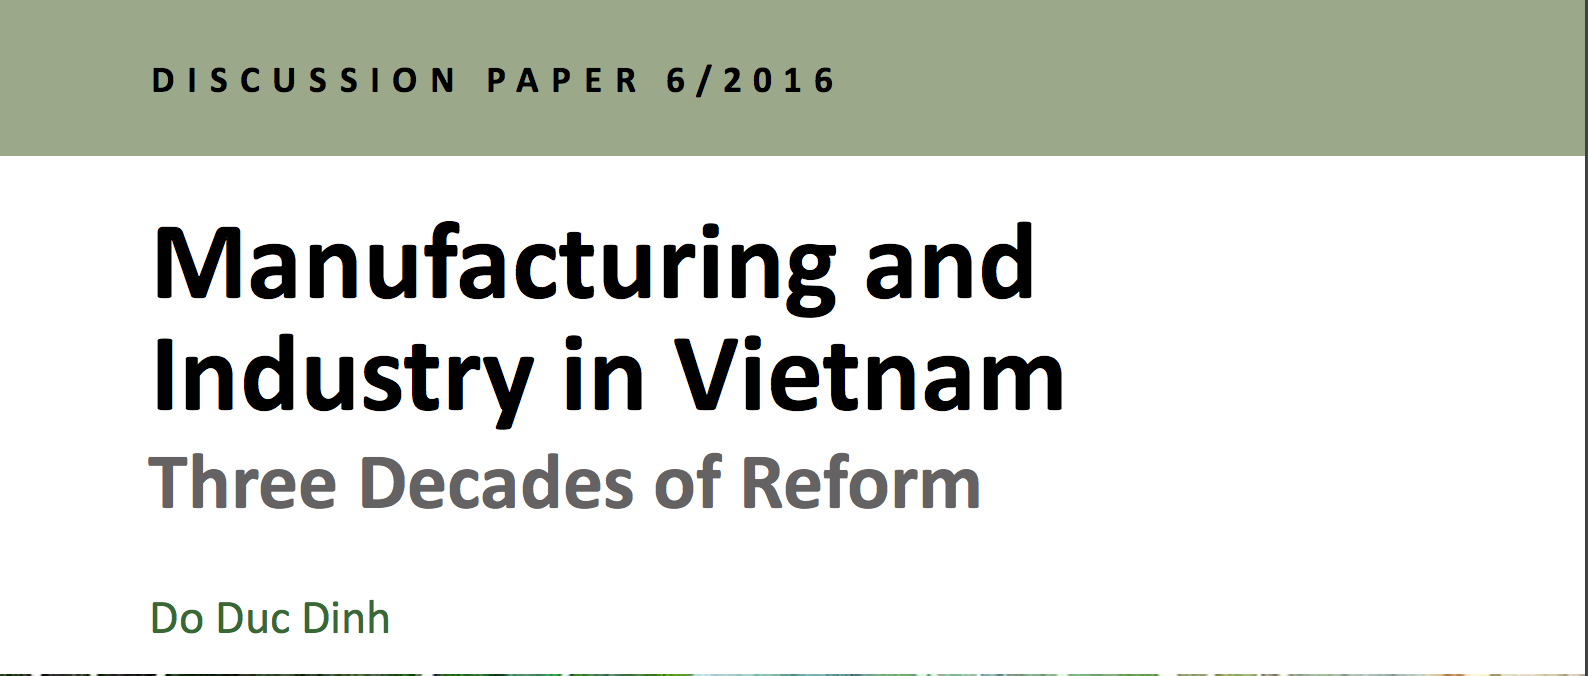 Manufacturing and Industry in Vietnam: Three Decades of Reform